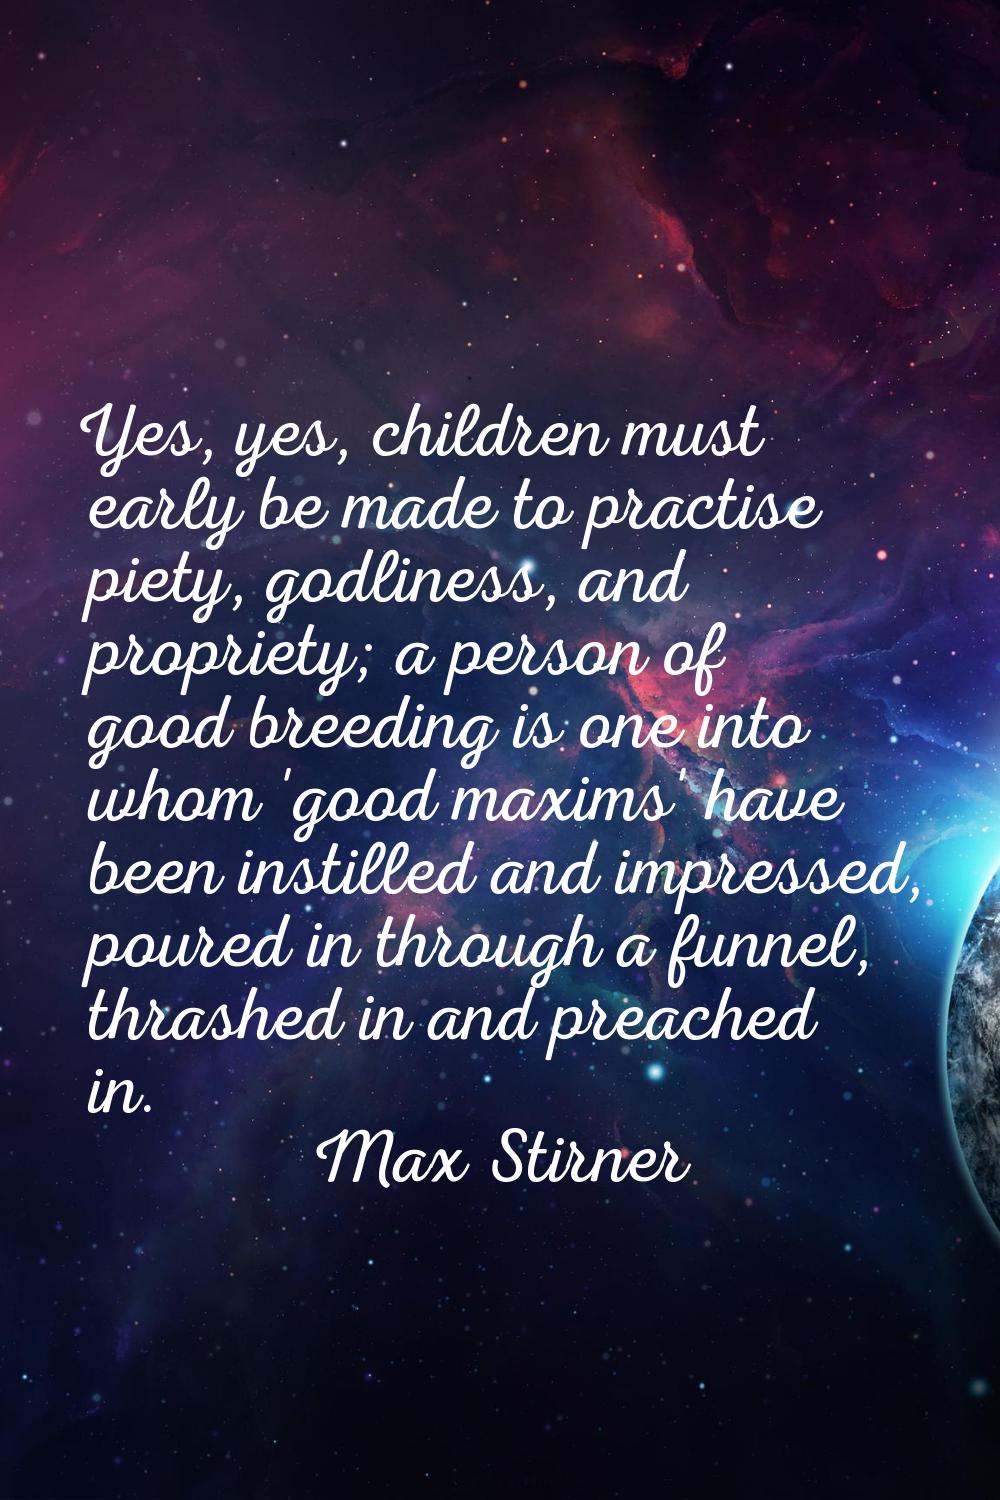 Yes, yes, children must early be made to practise piety, godliness, and propriety; a person of good